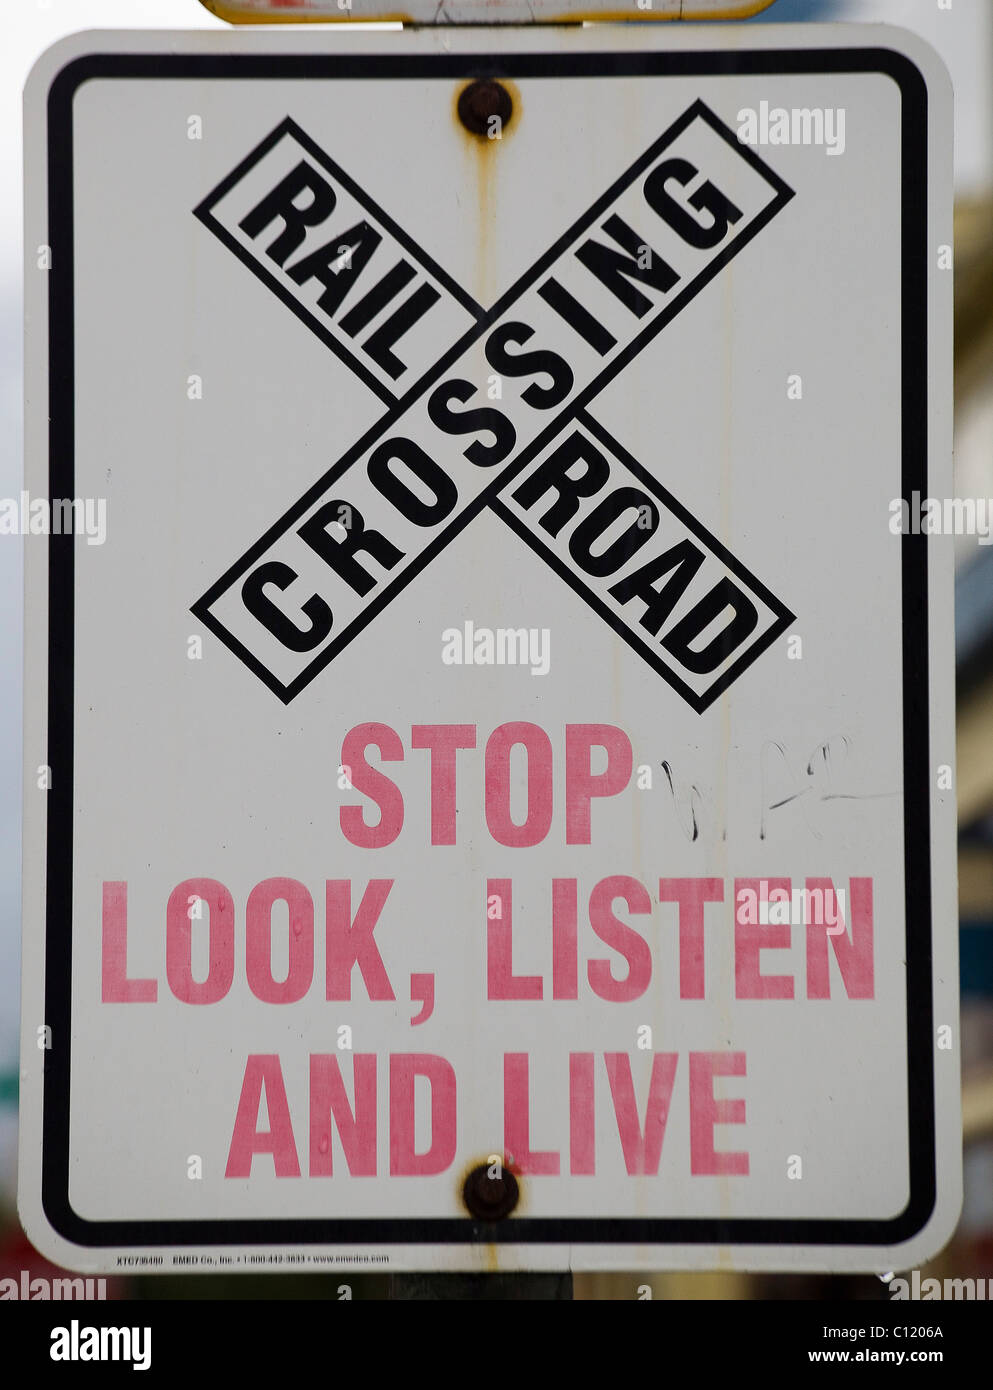 'Stop, look, listen and live', funny railroad crossing sign, Skagway, Alaska, USA Stock Photo